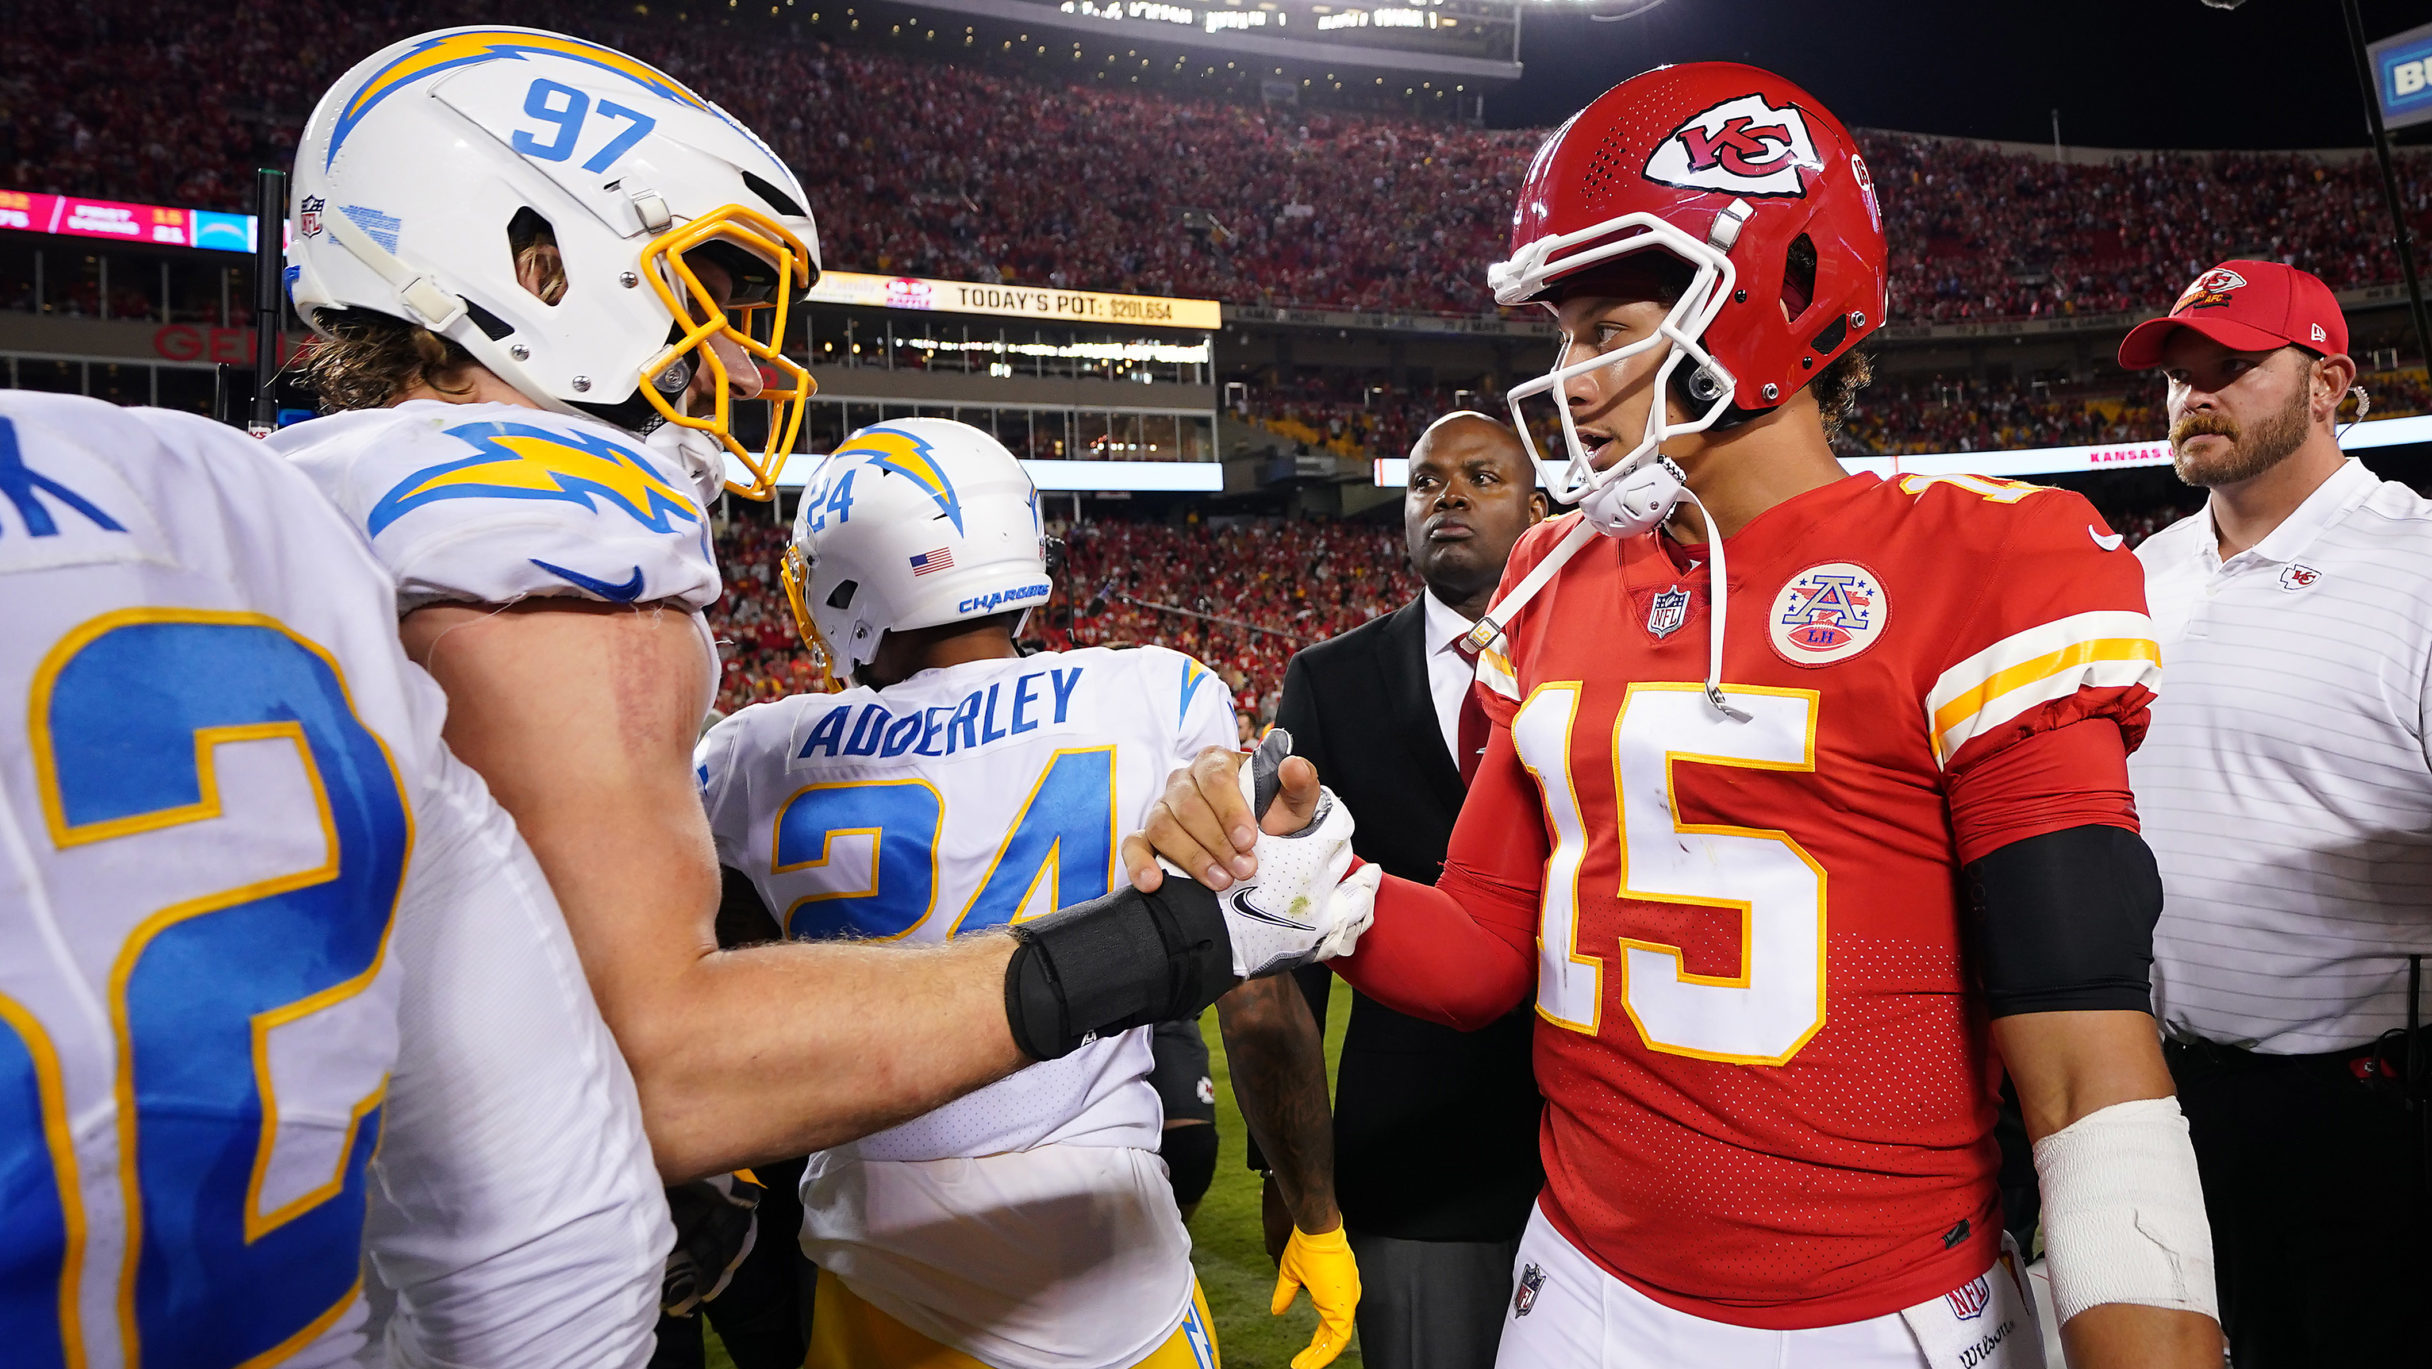 Chiefs vs Chargers score: Chiefs defeat Chargers 27-24 on Thursday